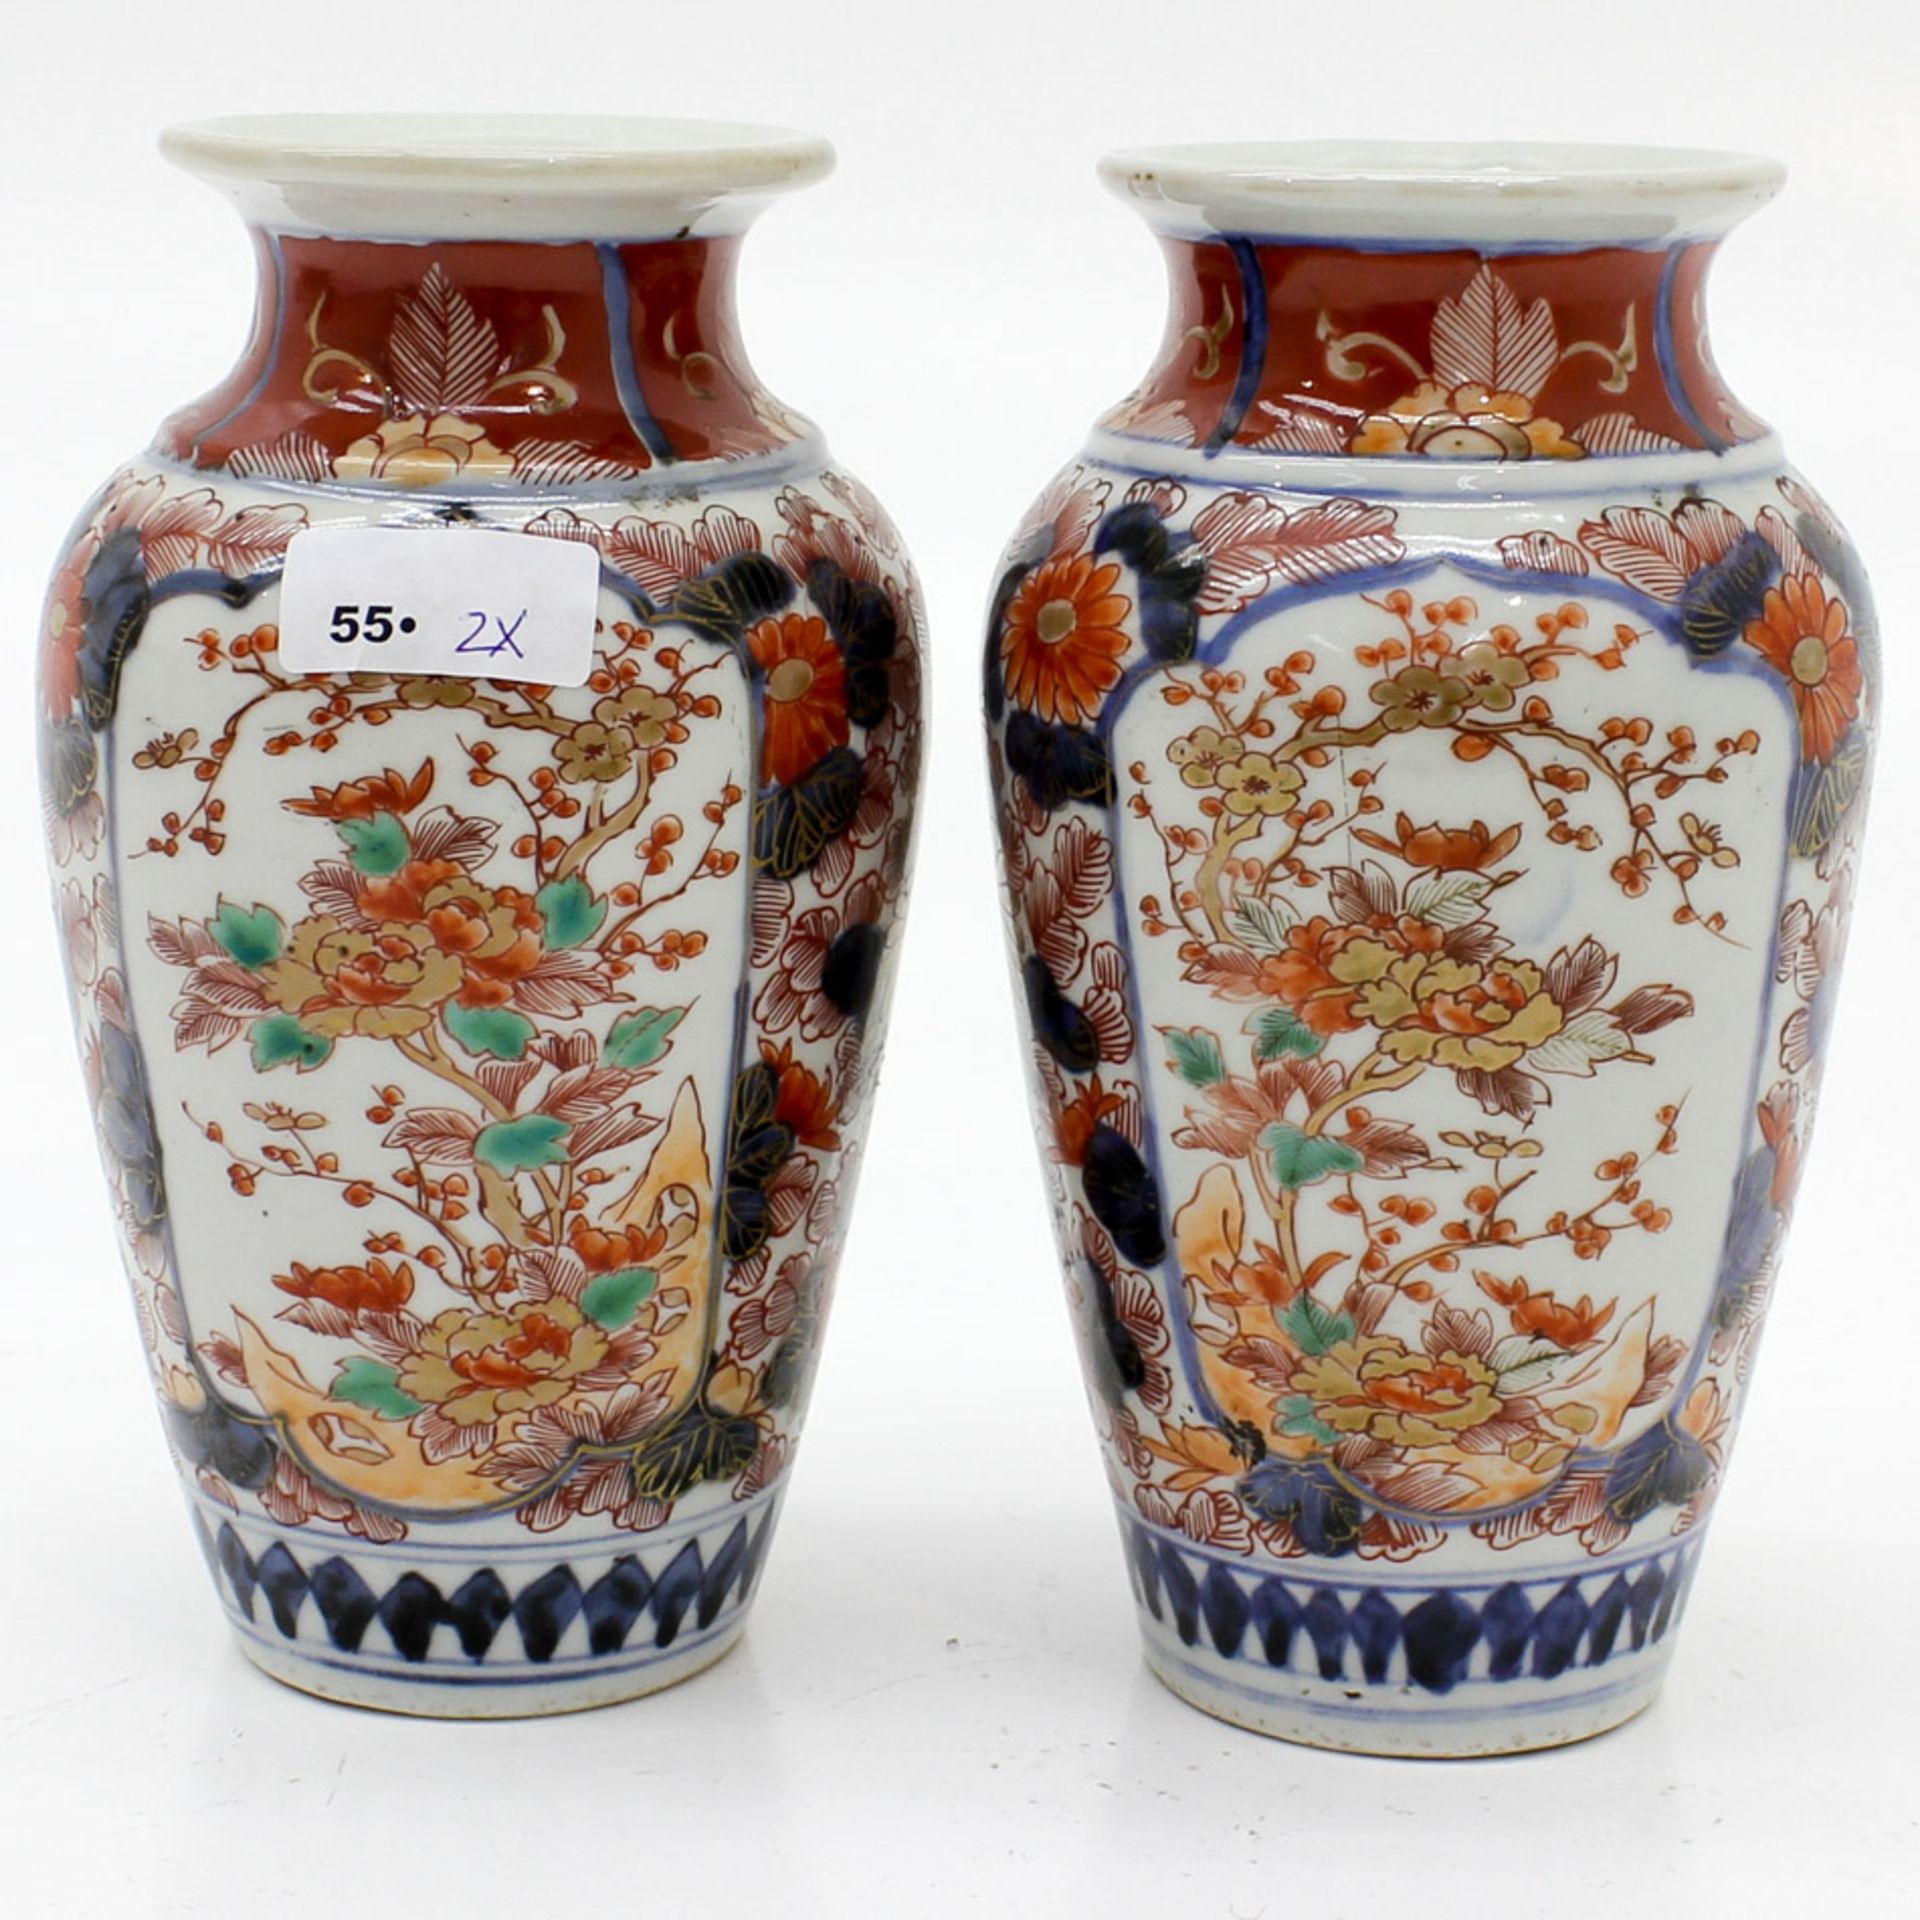 Lot of 2 Imari Vases In traditional decor and floral palette, 19 x 11 x 11 cm.